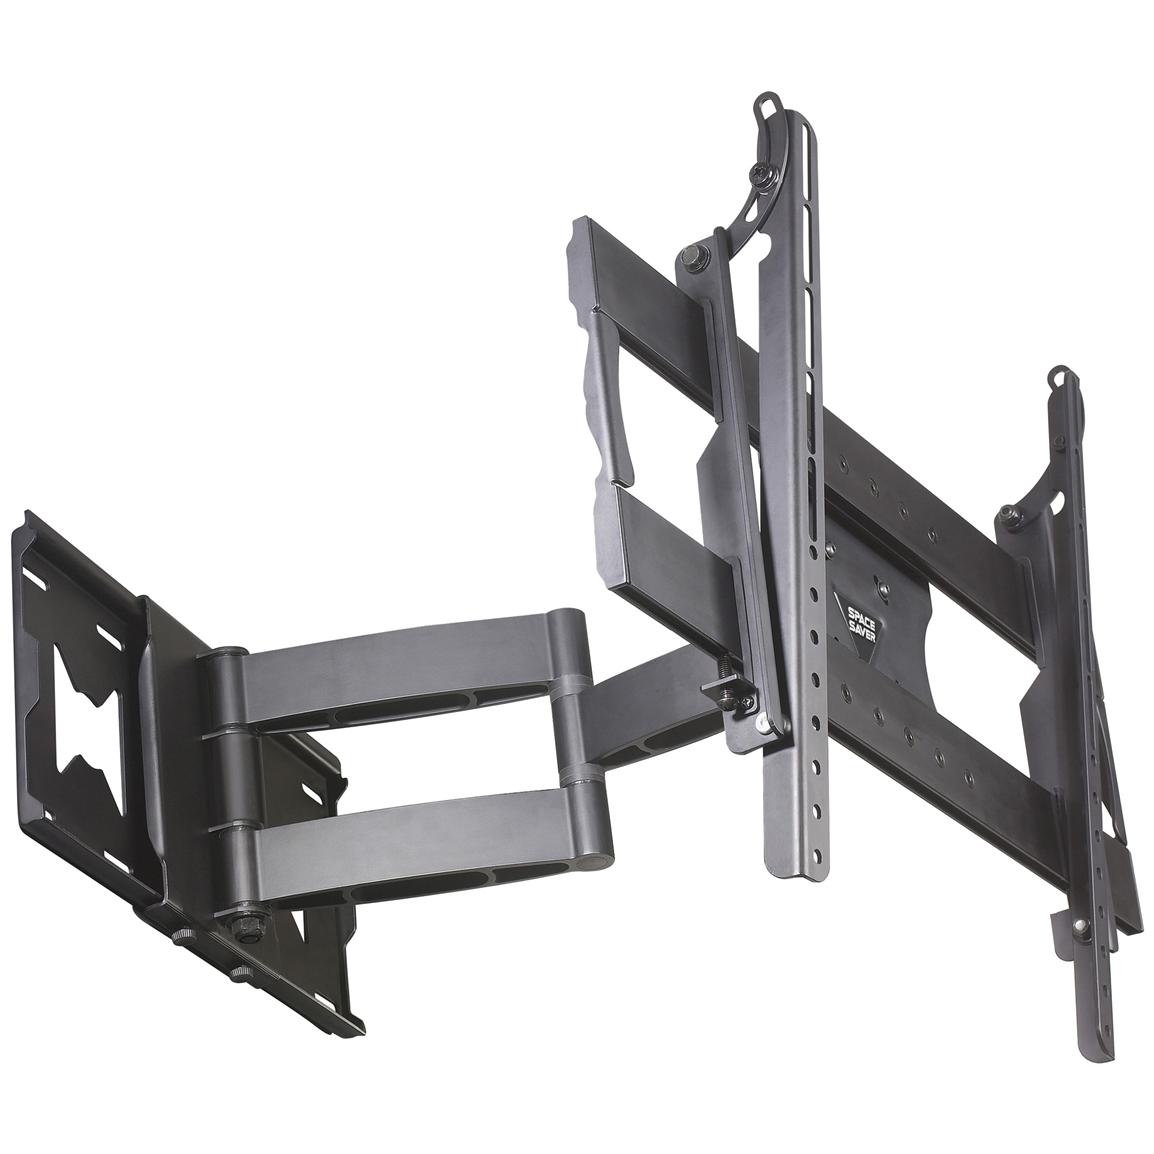 Space Saver™ 30504N Flat Panel TV Full Motion Wall Mount for 301154 x 1154